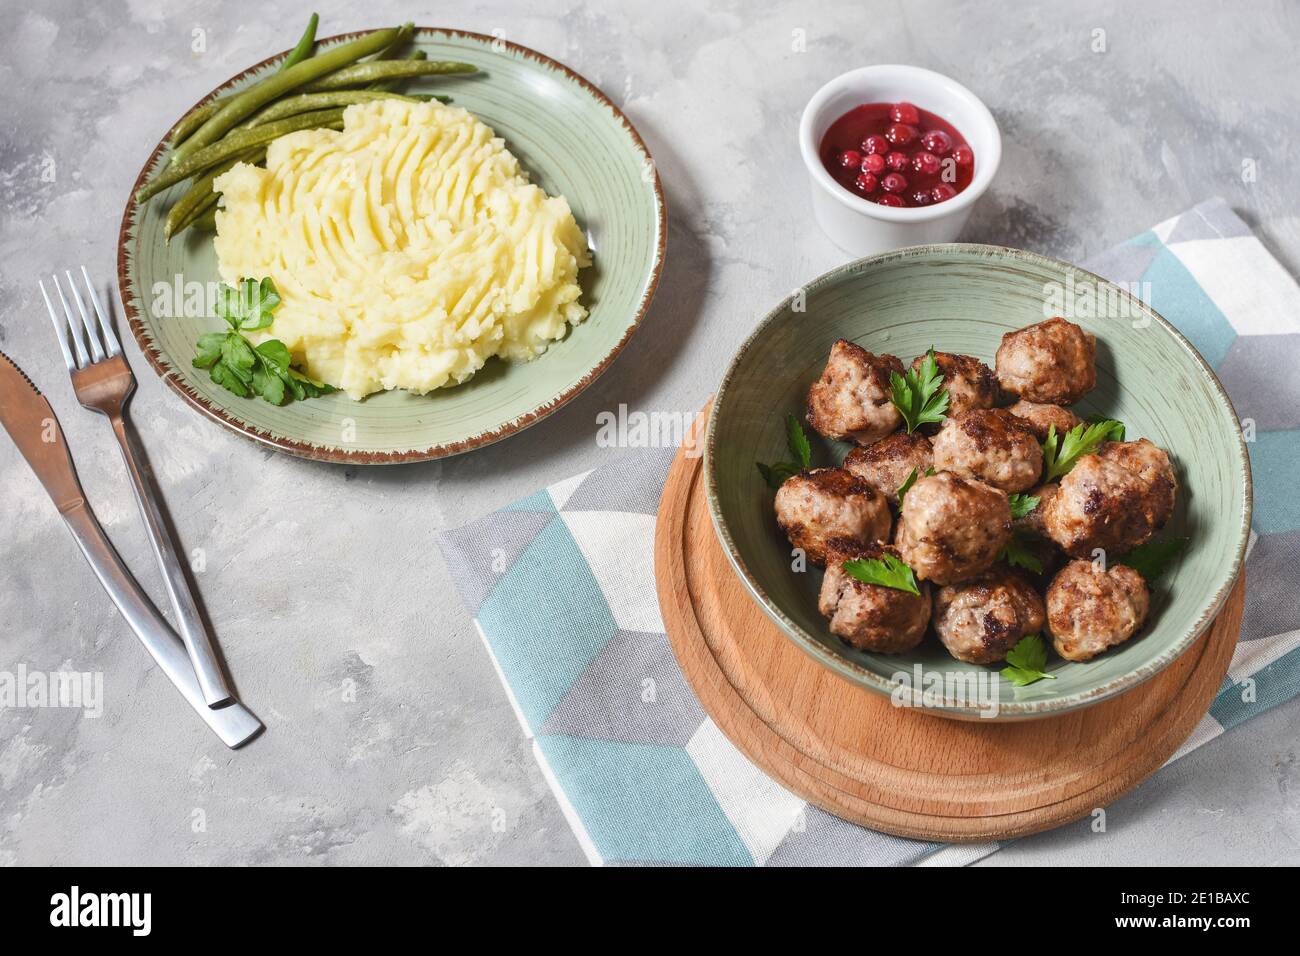 Swedish meatballs with mashed potatoes and green beans Stock Photo